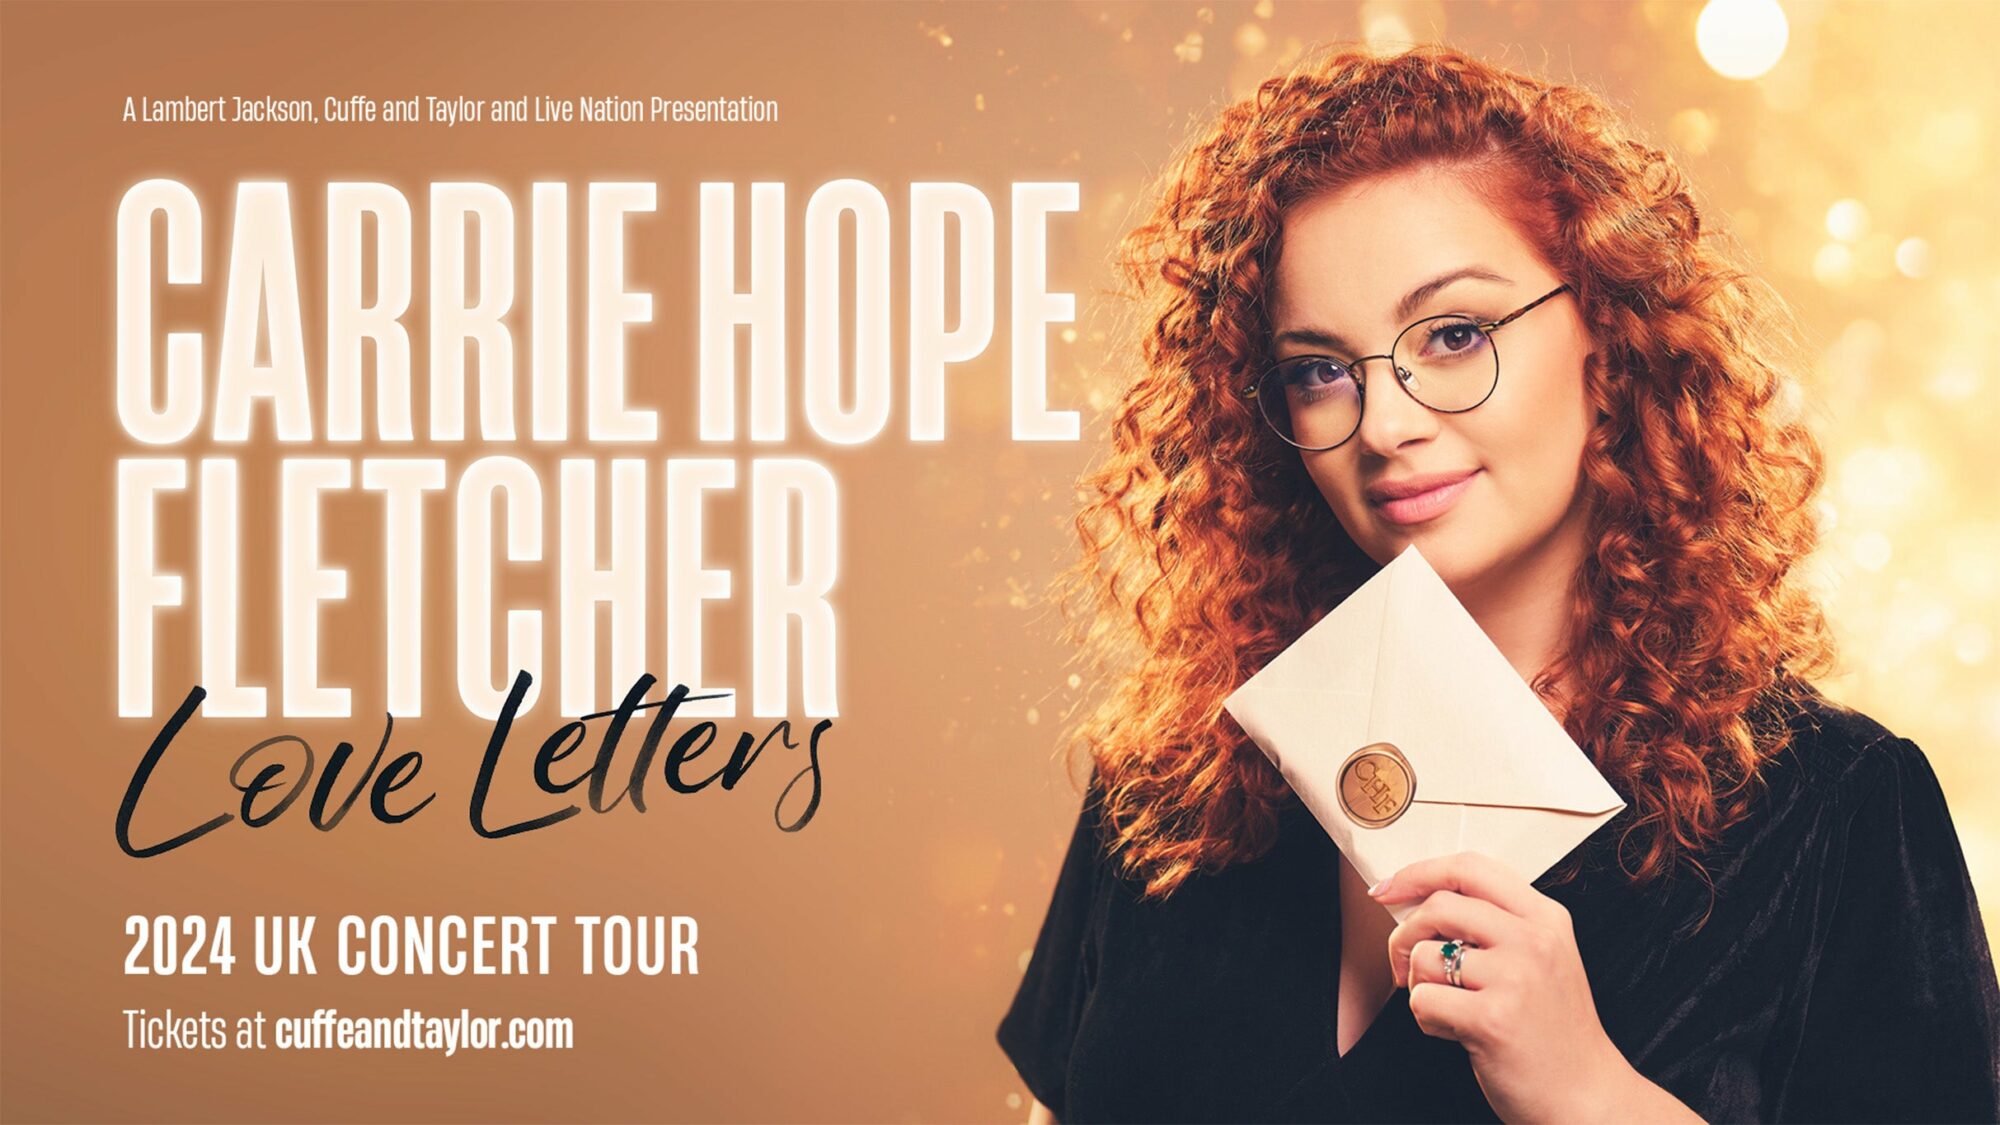 Image name Carrie Hope Fletcher Love Letters at York Barbican York the 28 image from the post Carrie Hope Fletcher - Love Letters at York Barbican, York in Yorkshire.com.